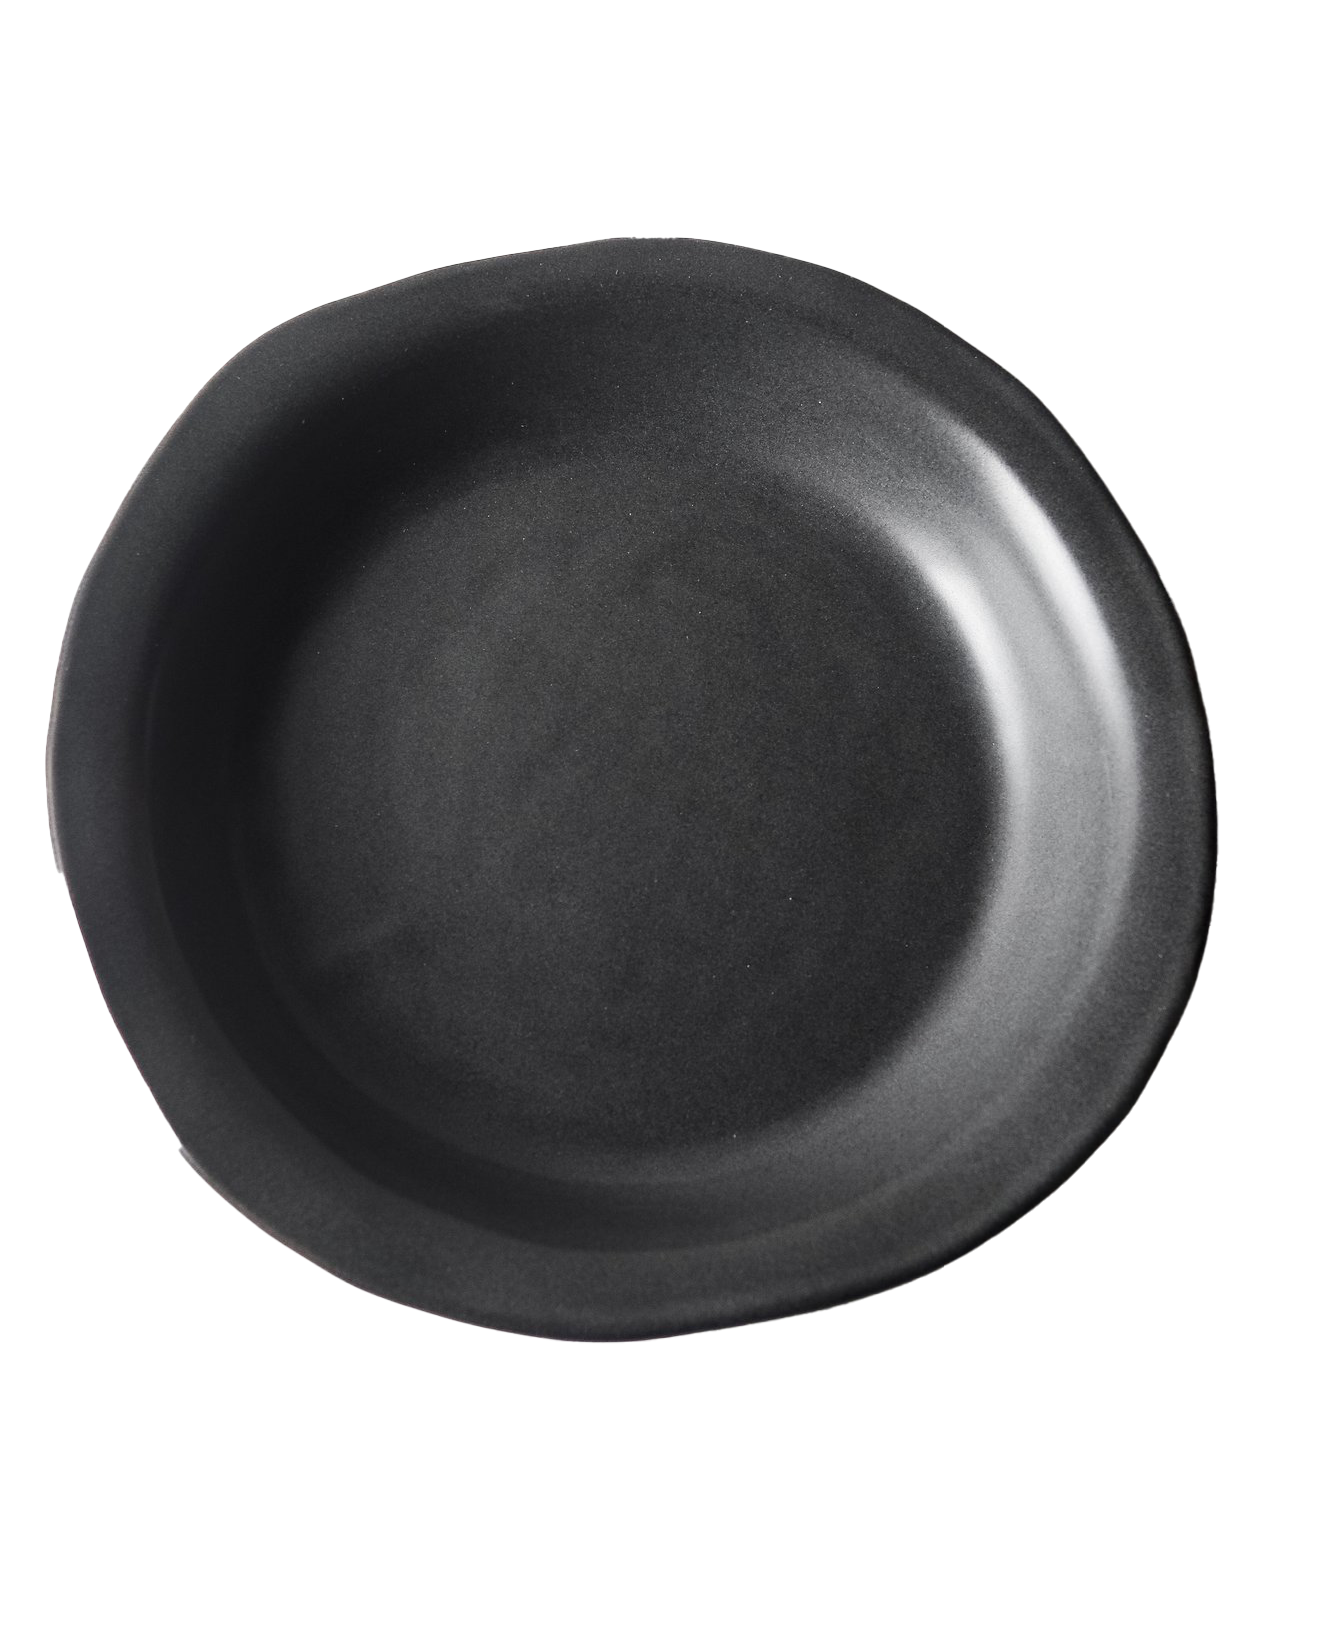 holiday baking supplies: an image of a black matte pie plate